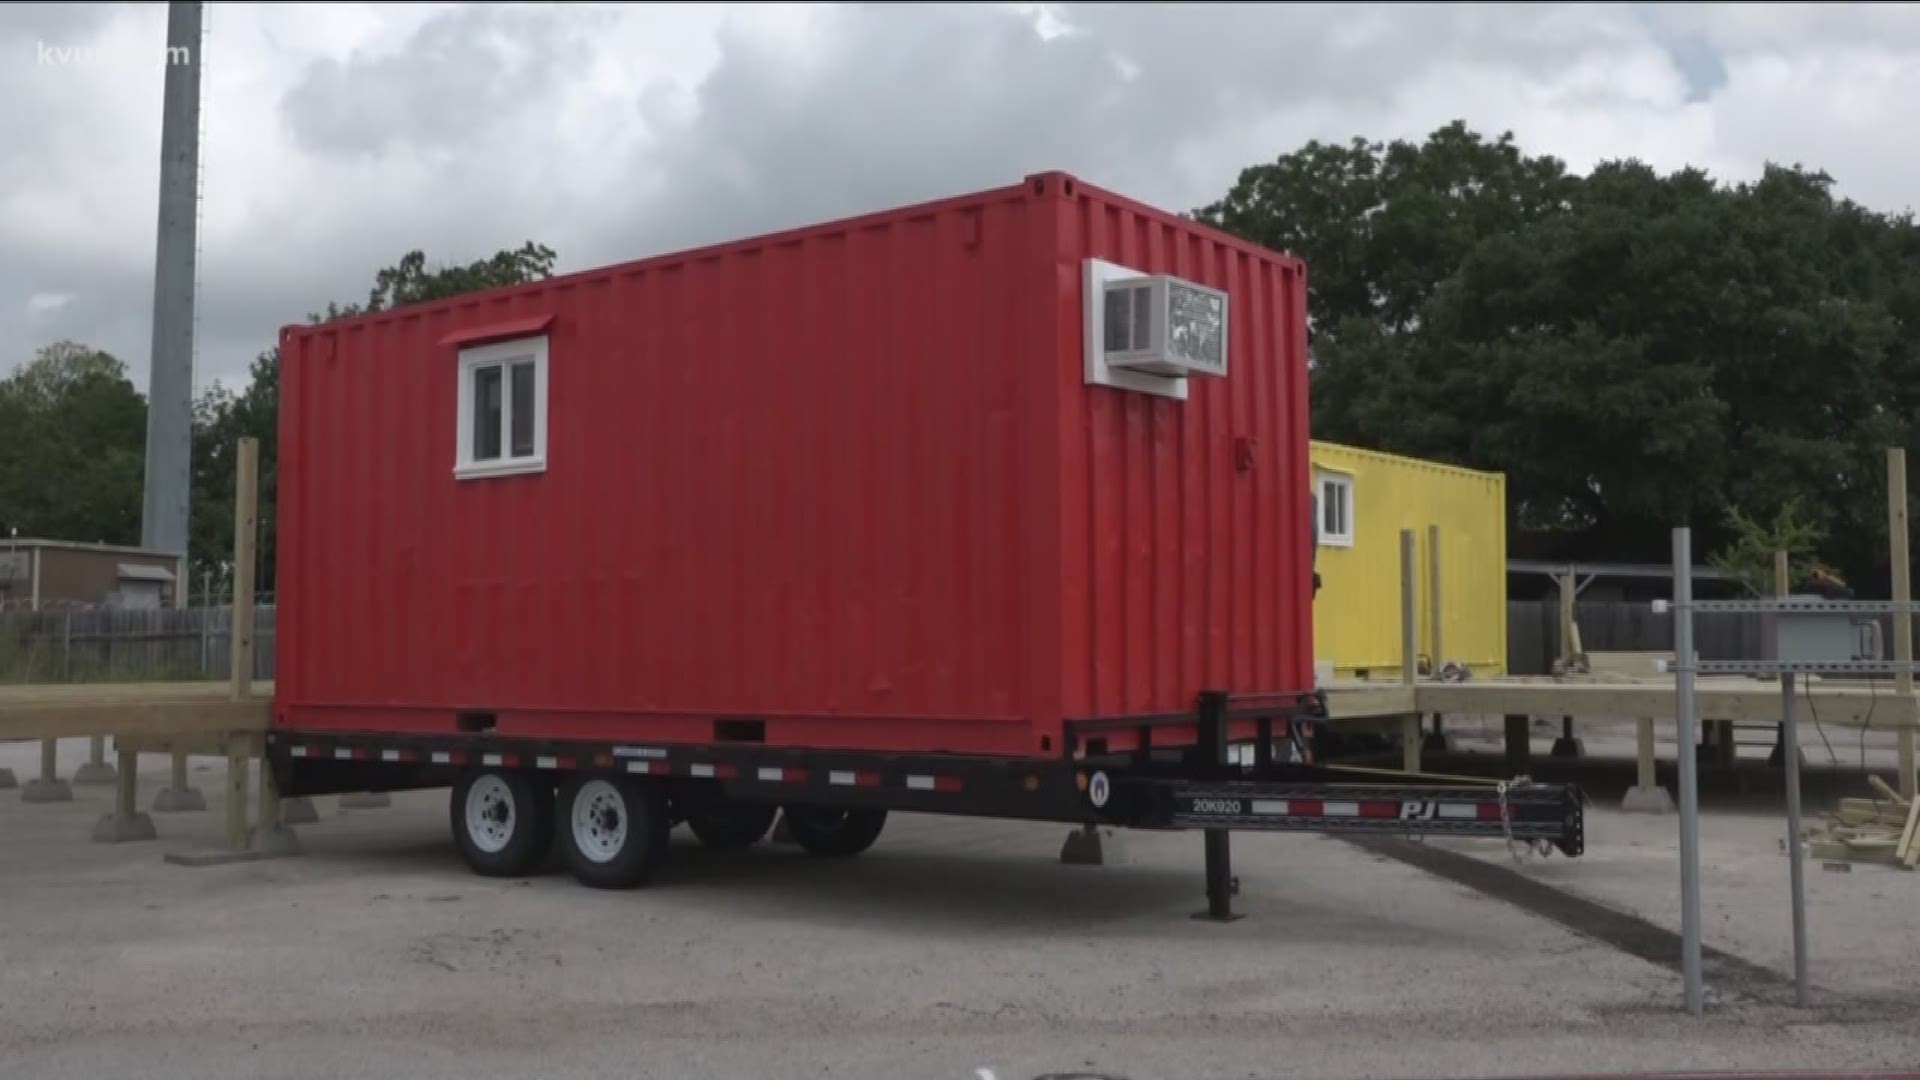 Businesses working out of old shipping containers is the unique way the City of Austin is looking to help entrepreneurs grow their business. It's called Box Bazaar and it's something the city's never done before.